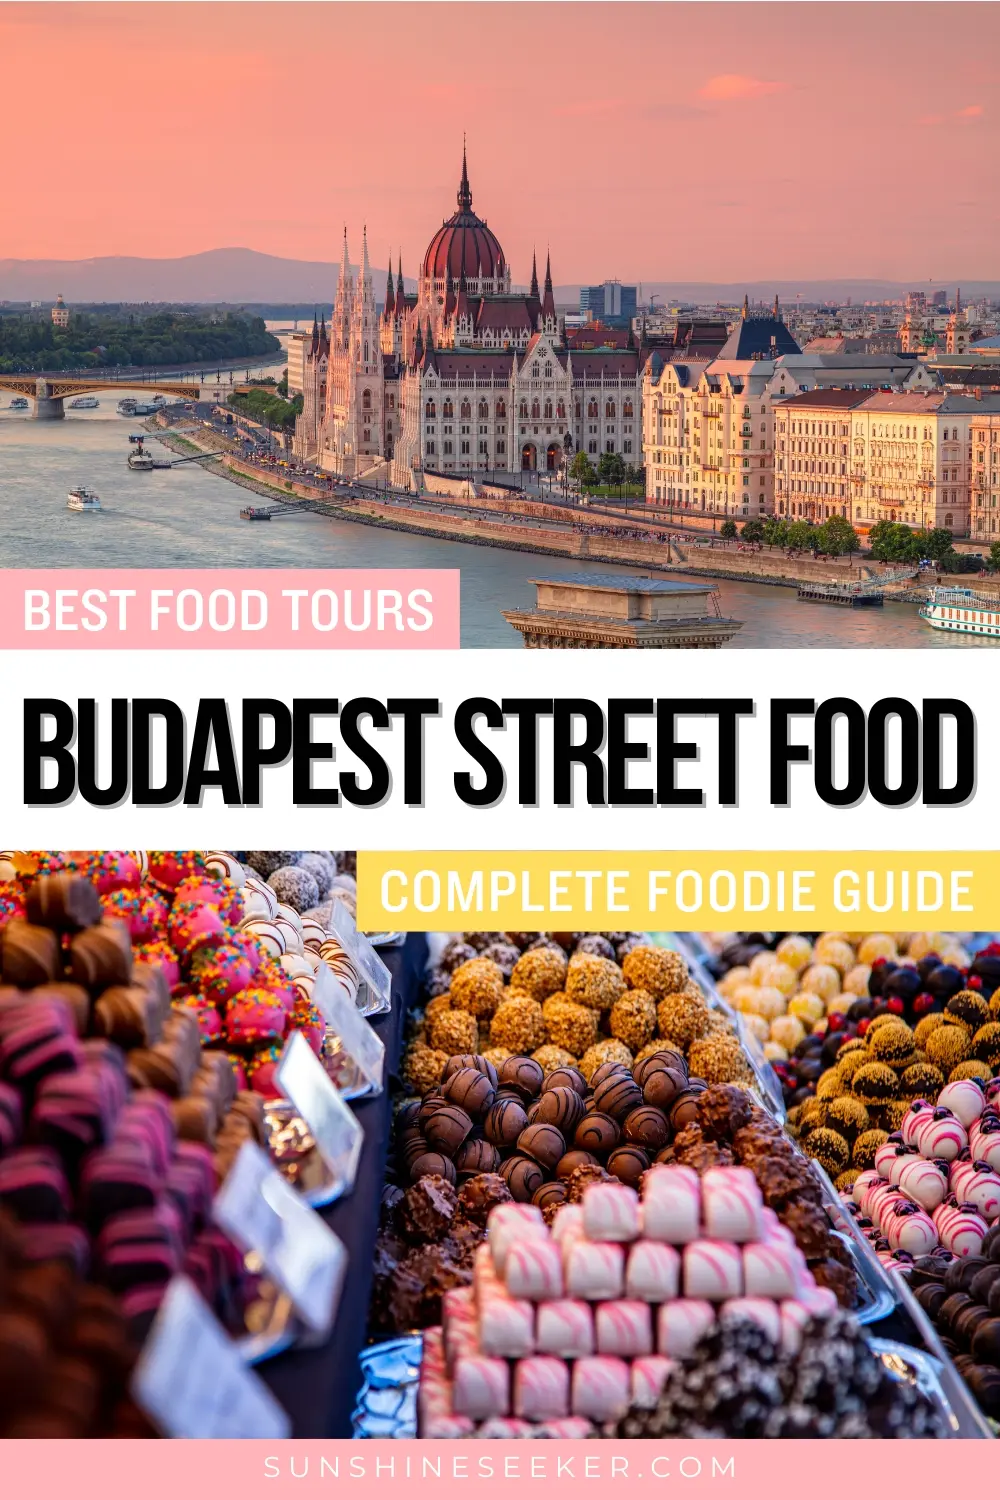 Click through for a complete Budapest street food guide. Discover where to find the best street food in Budapest, dishes you must try and the best street food tours. Budapest is a foodie's dream!